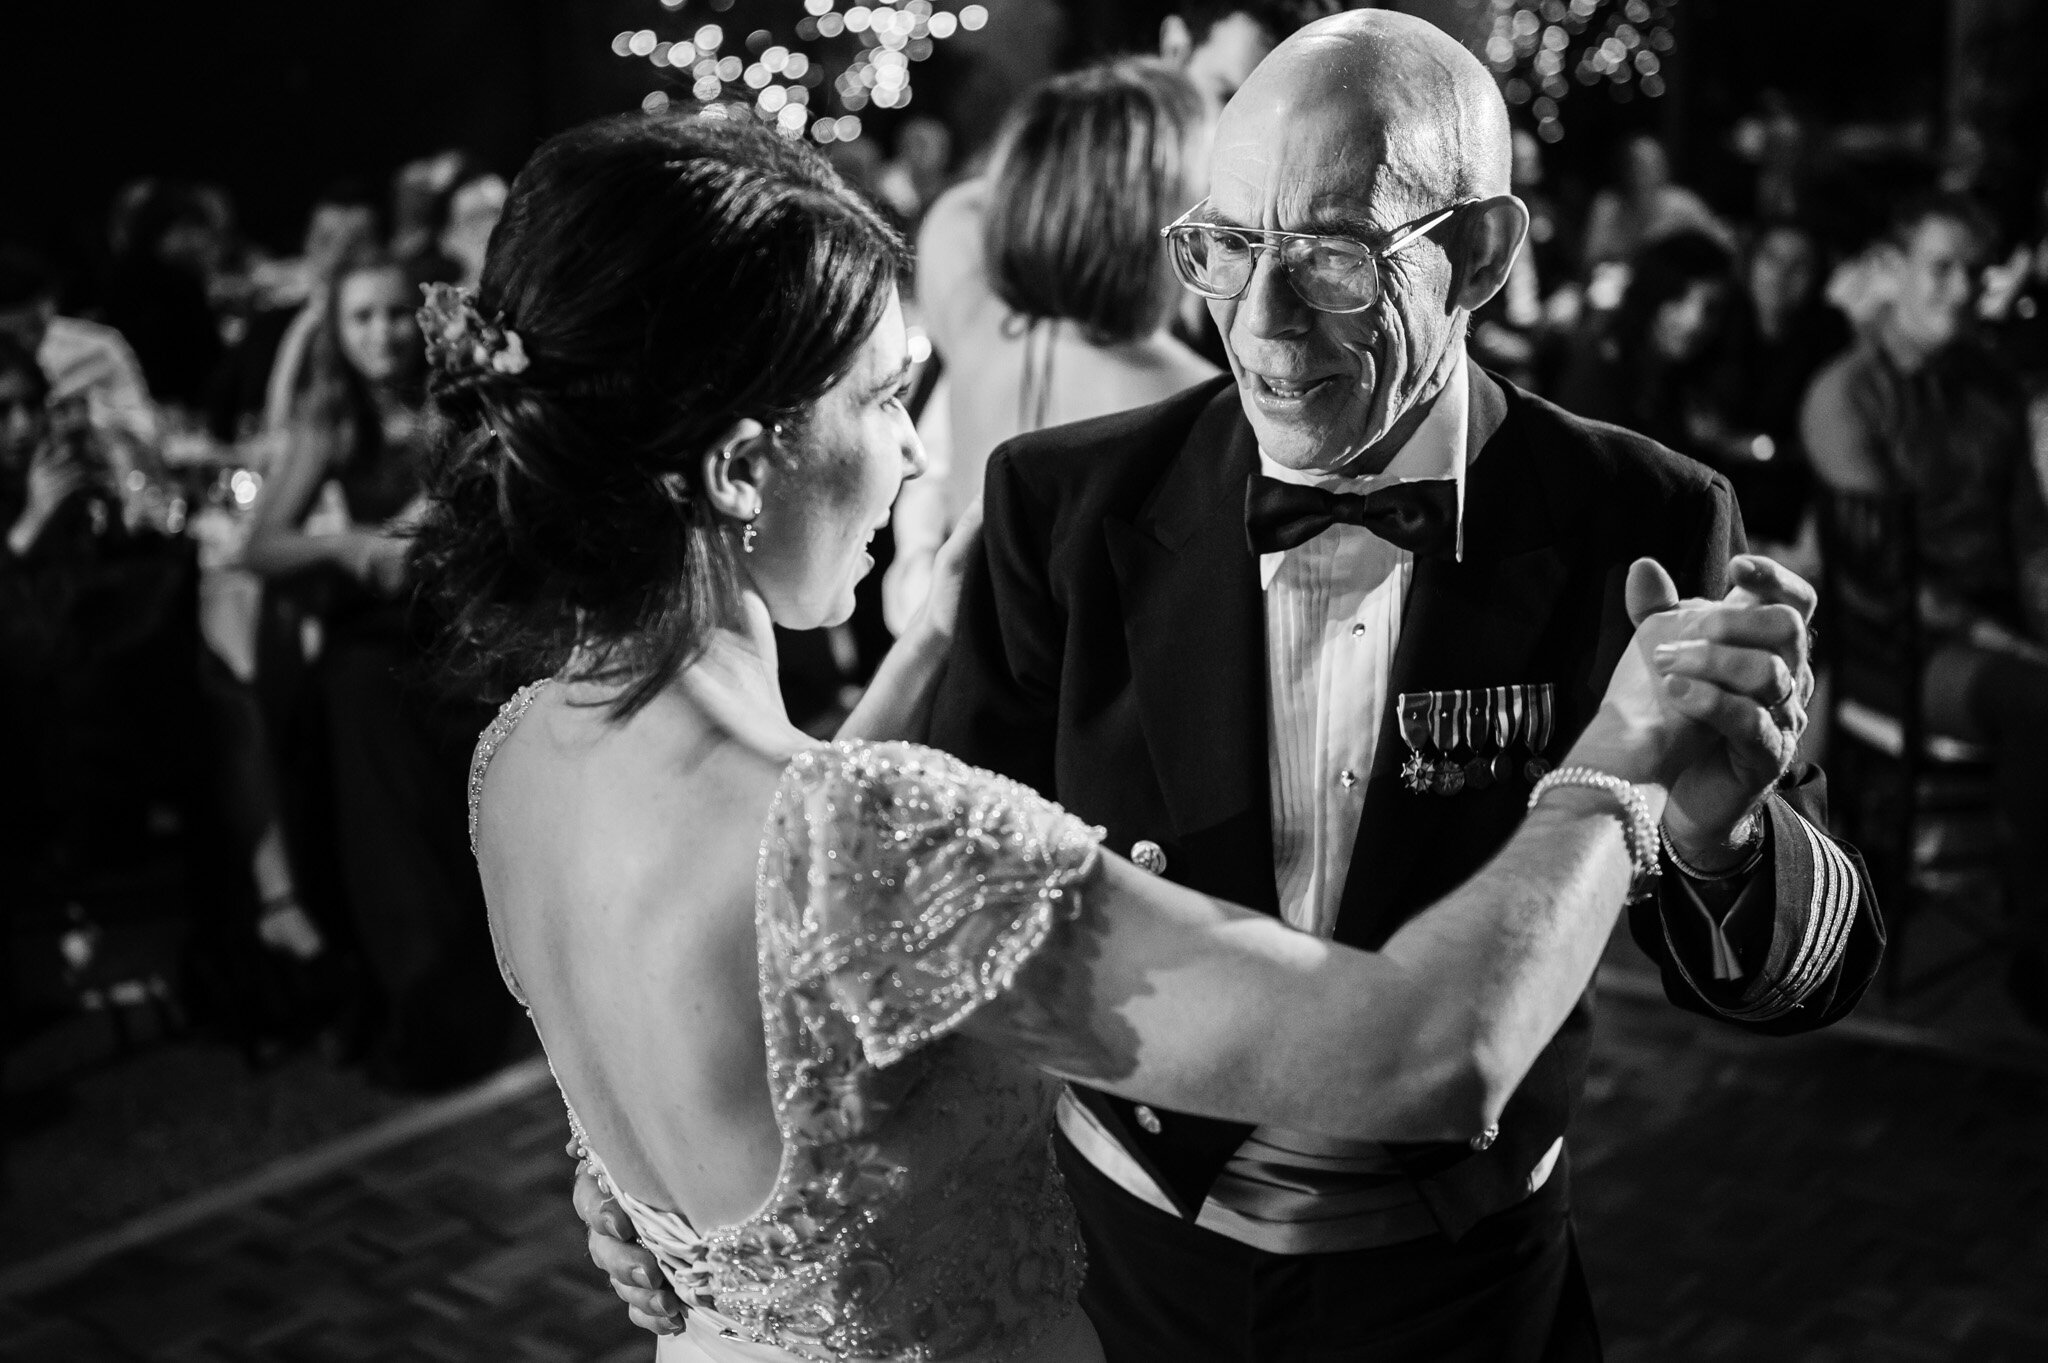 The bride and her father share a dance together at her wedding reception